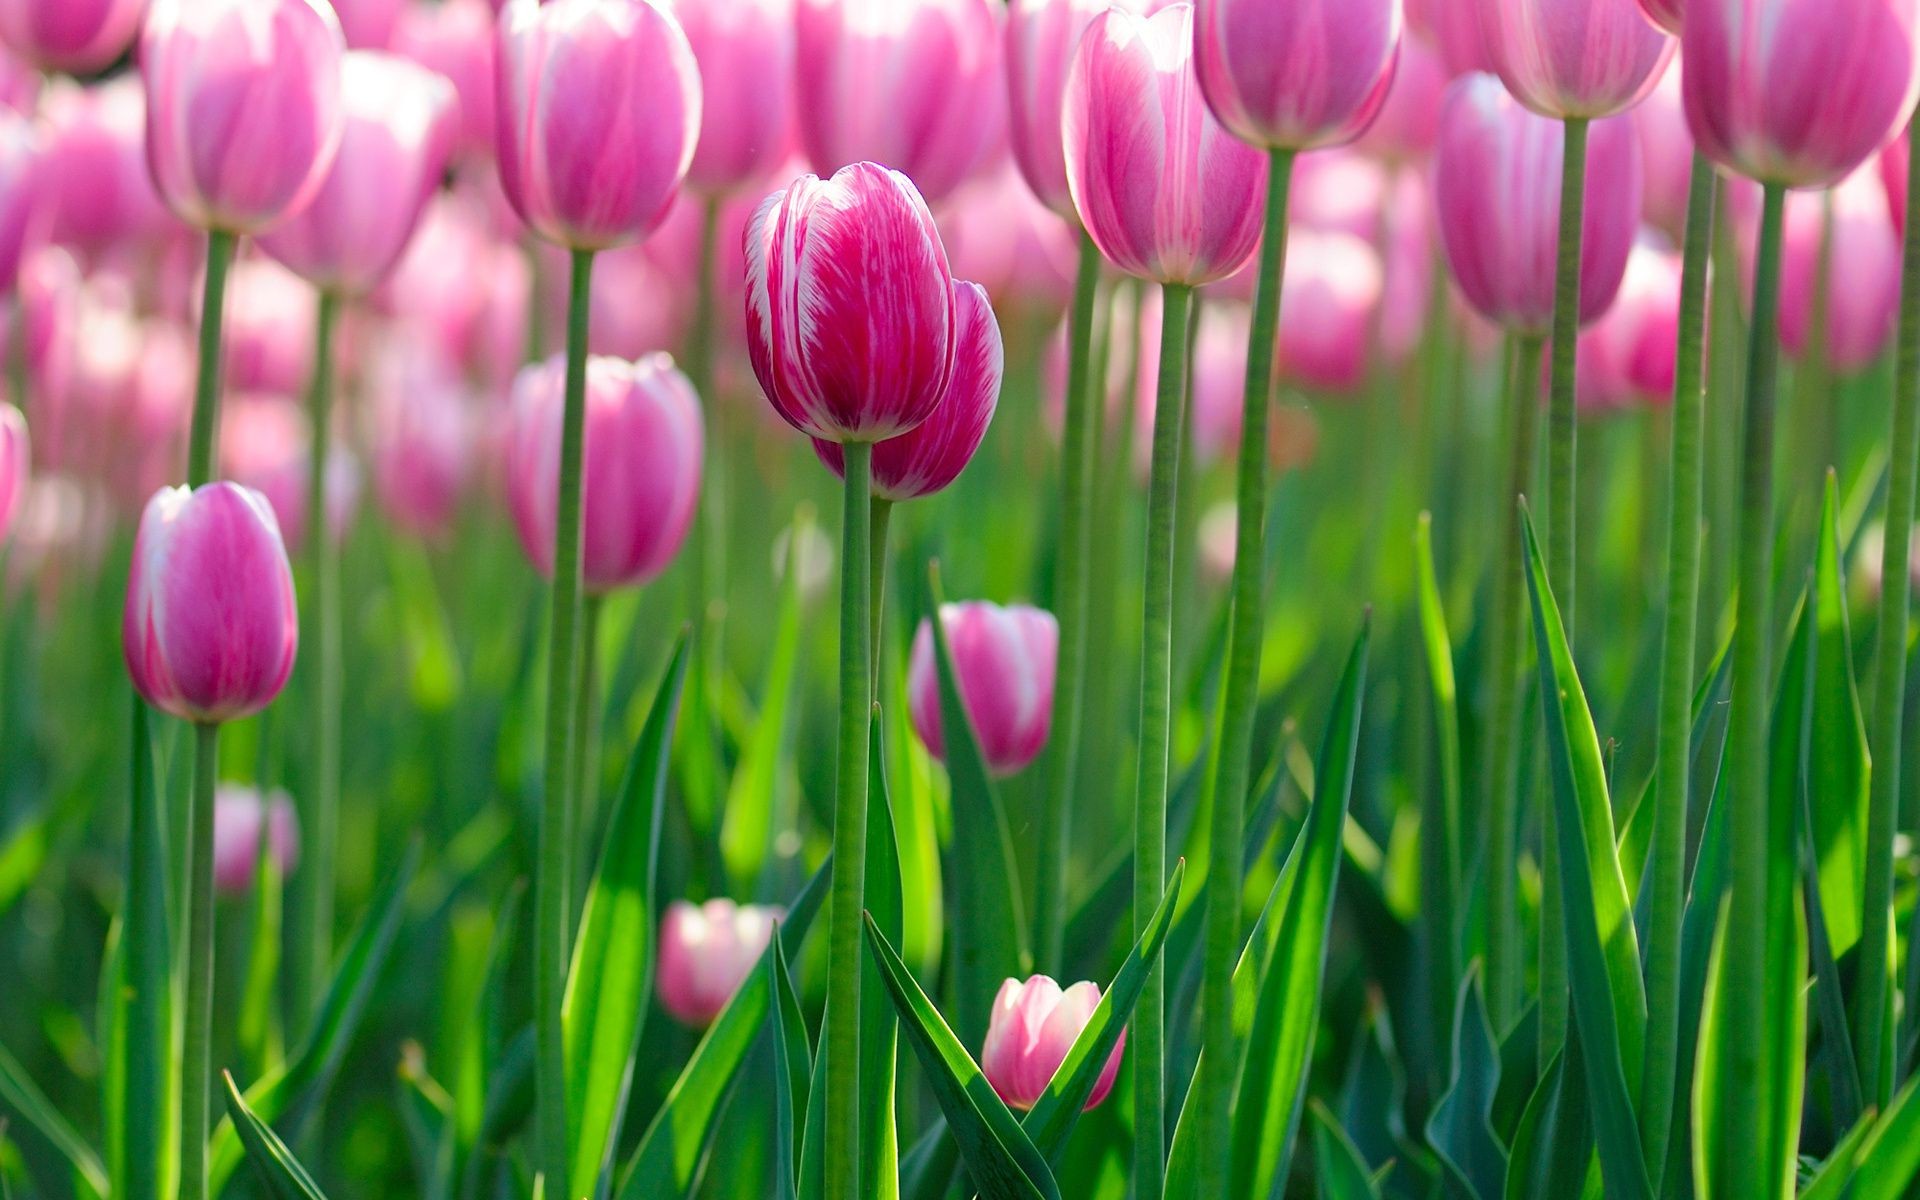 tulips nature flora flower tulip garden bright easter summer leaf floral season field color growth fair weather vibrant petal grass blooming